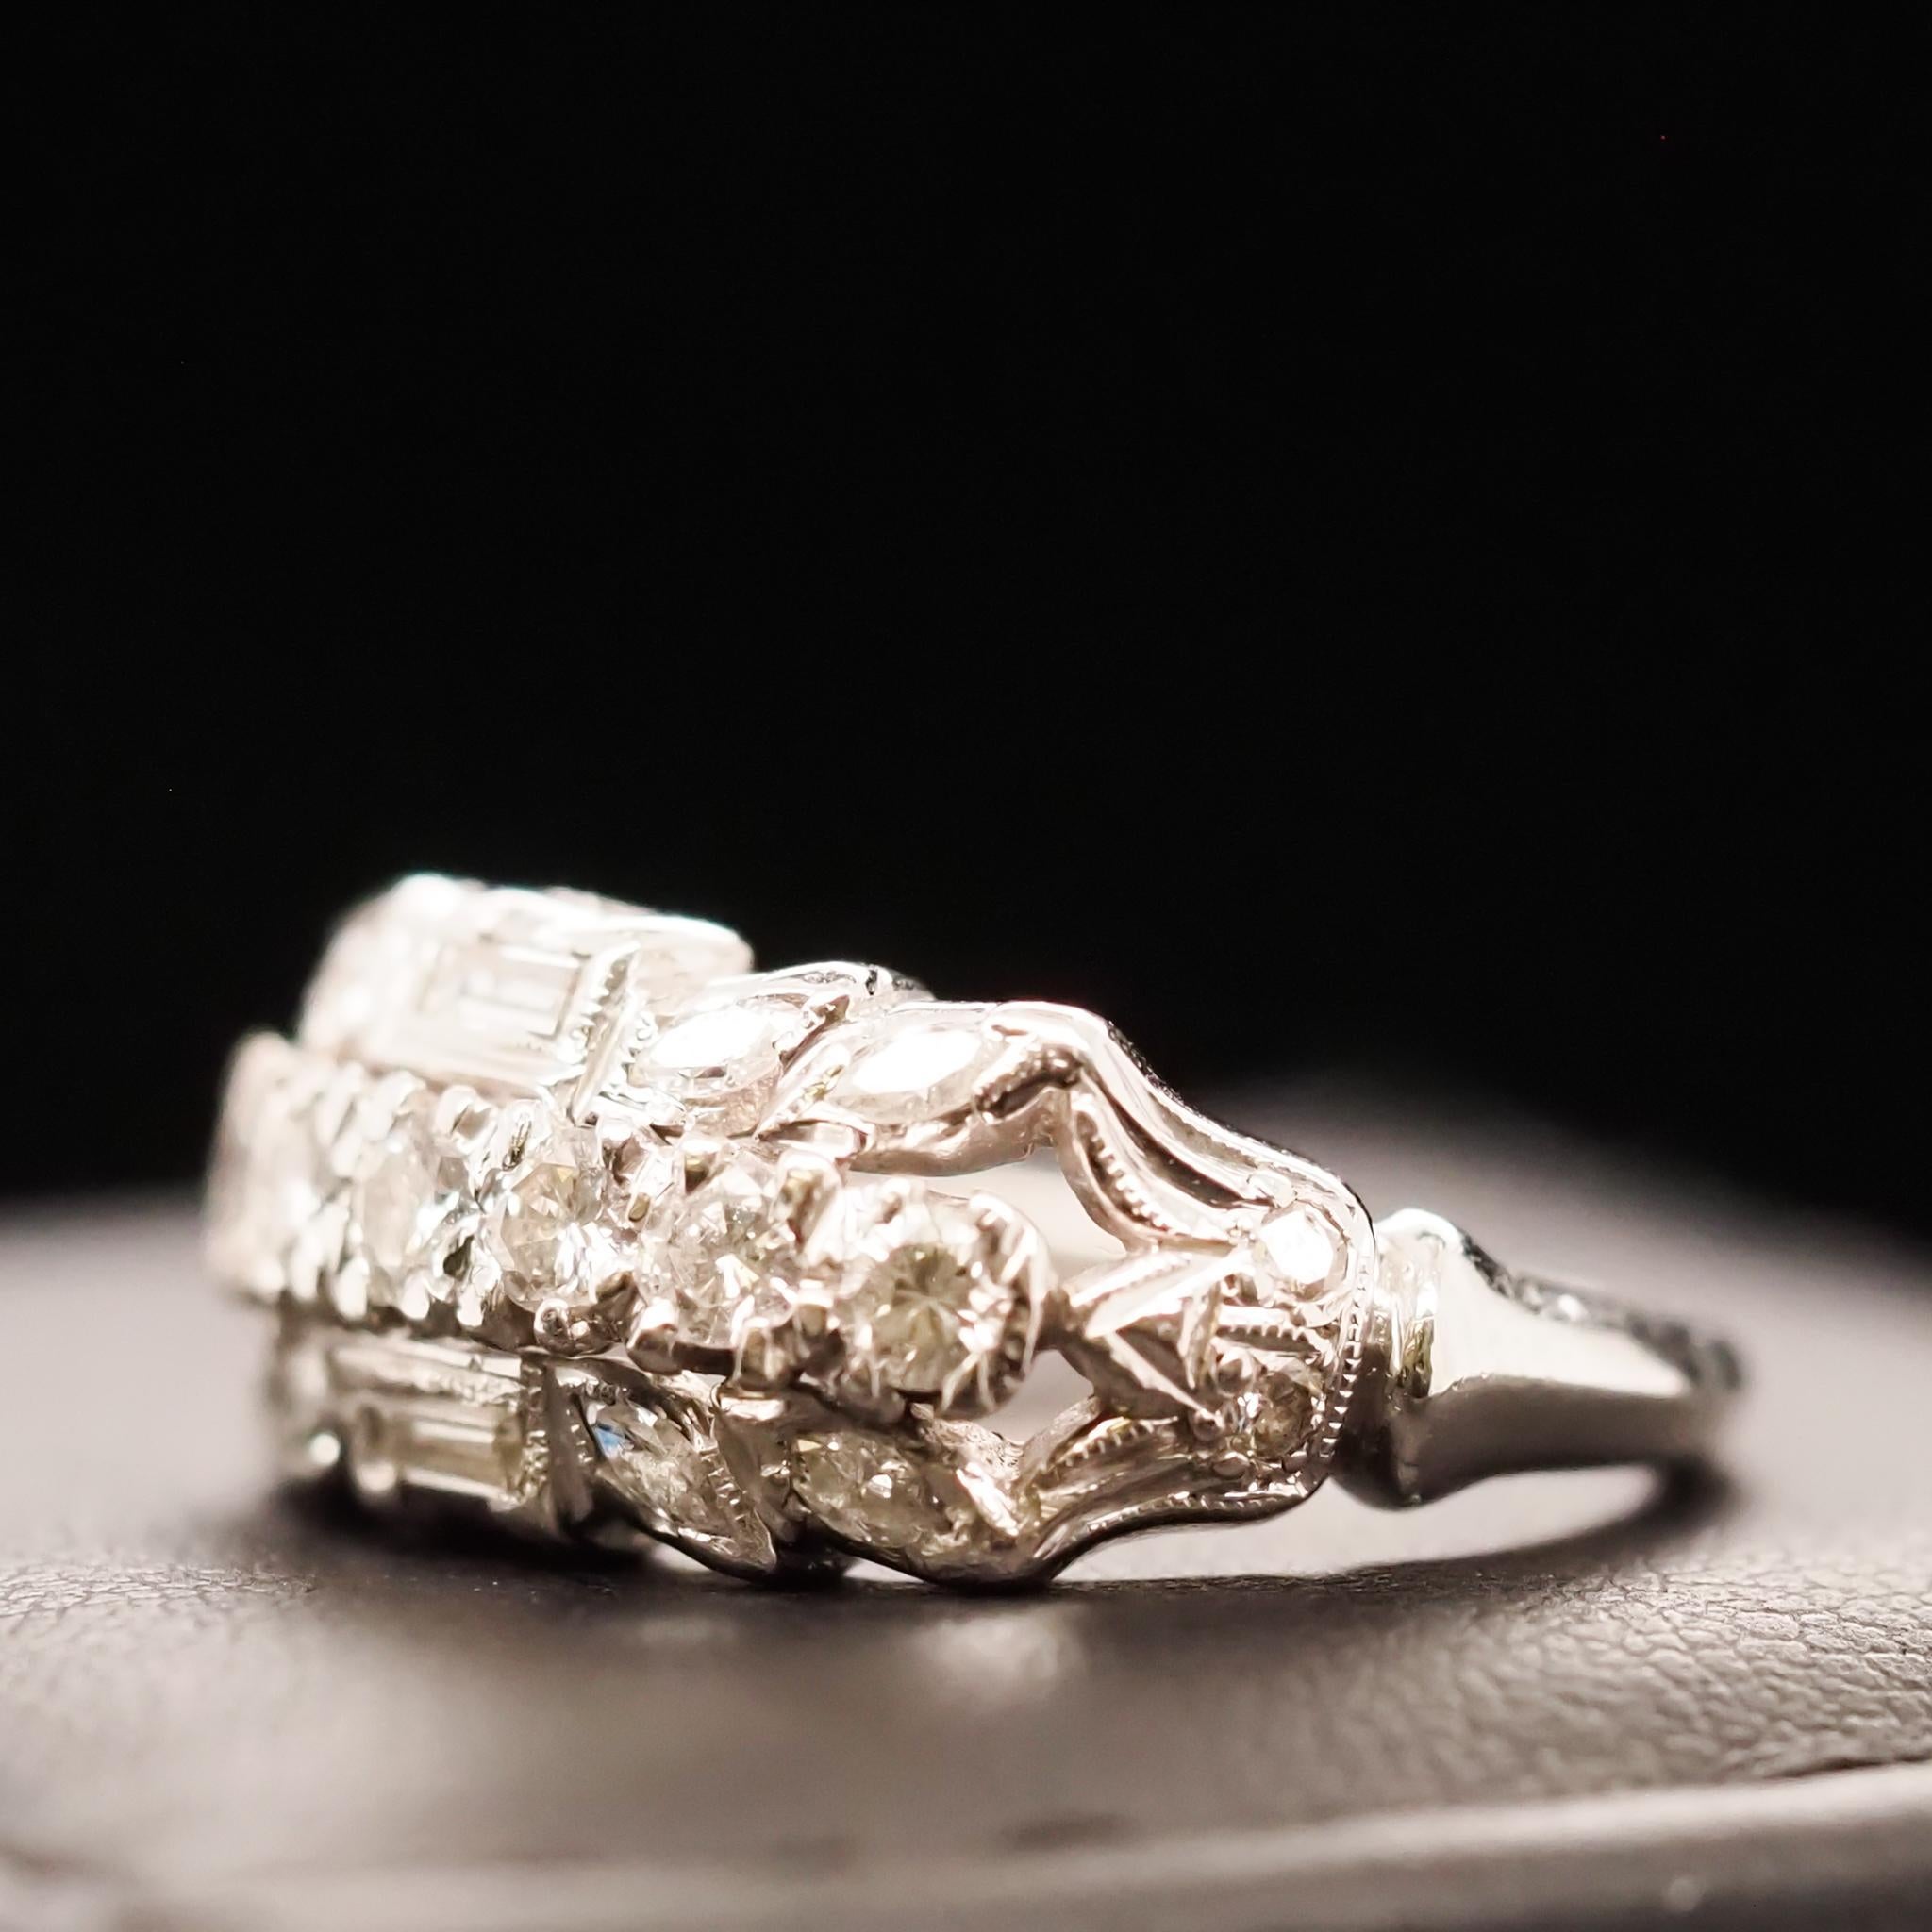 Year: 1940s
Item Details:
Ring Size: 5.5
Metal Type: Platinum [Hallmarked, and Tested]
Weight: 7.5 grams
Diamond Details: .75ct, Old European and Baguette Cut, F-G Color, VS Clarity
Band Width: 1.8mm
Condition: Excellent